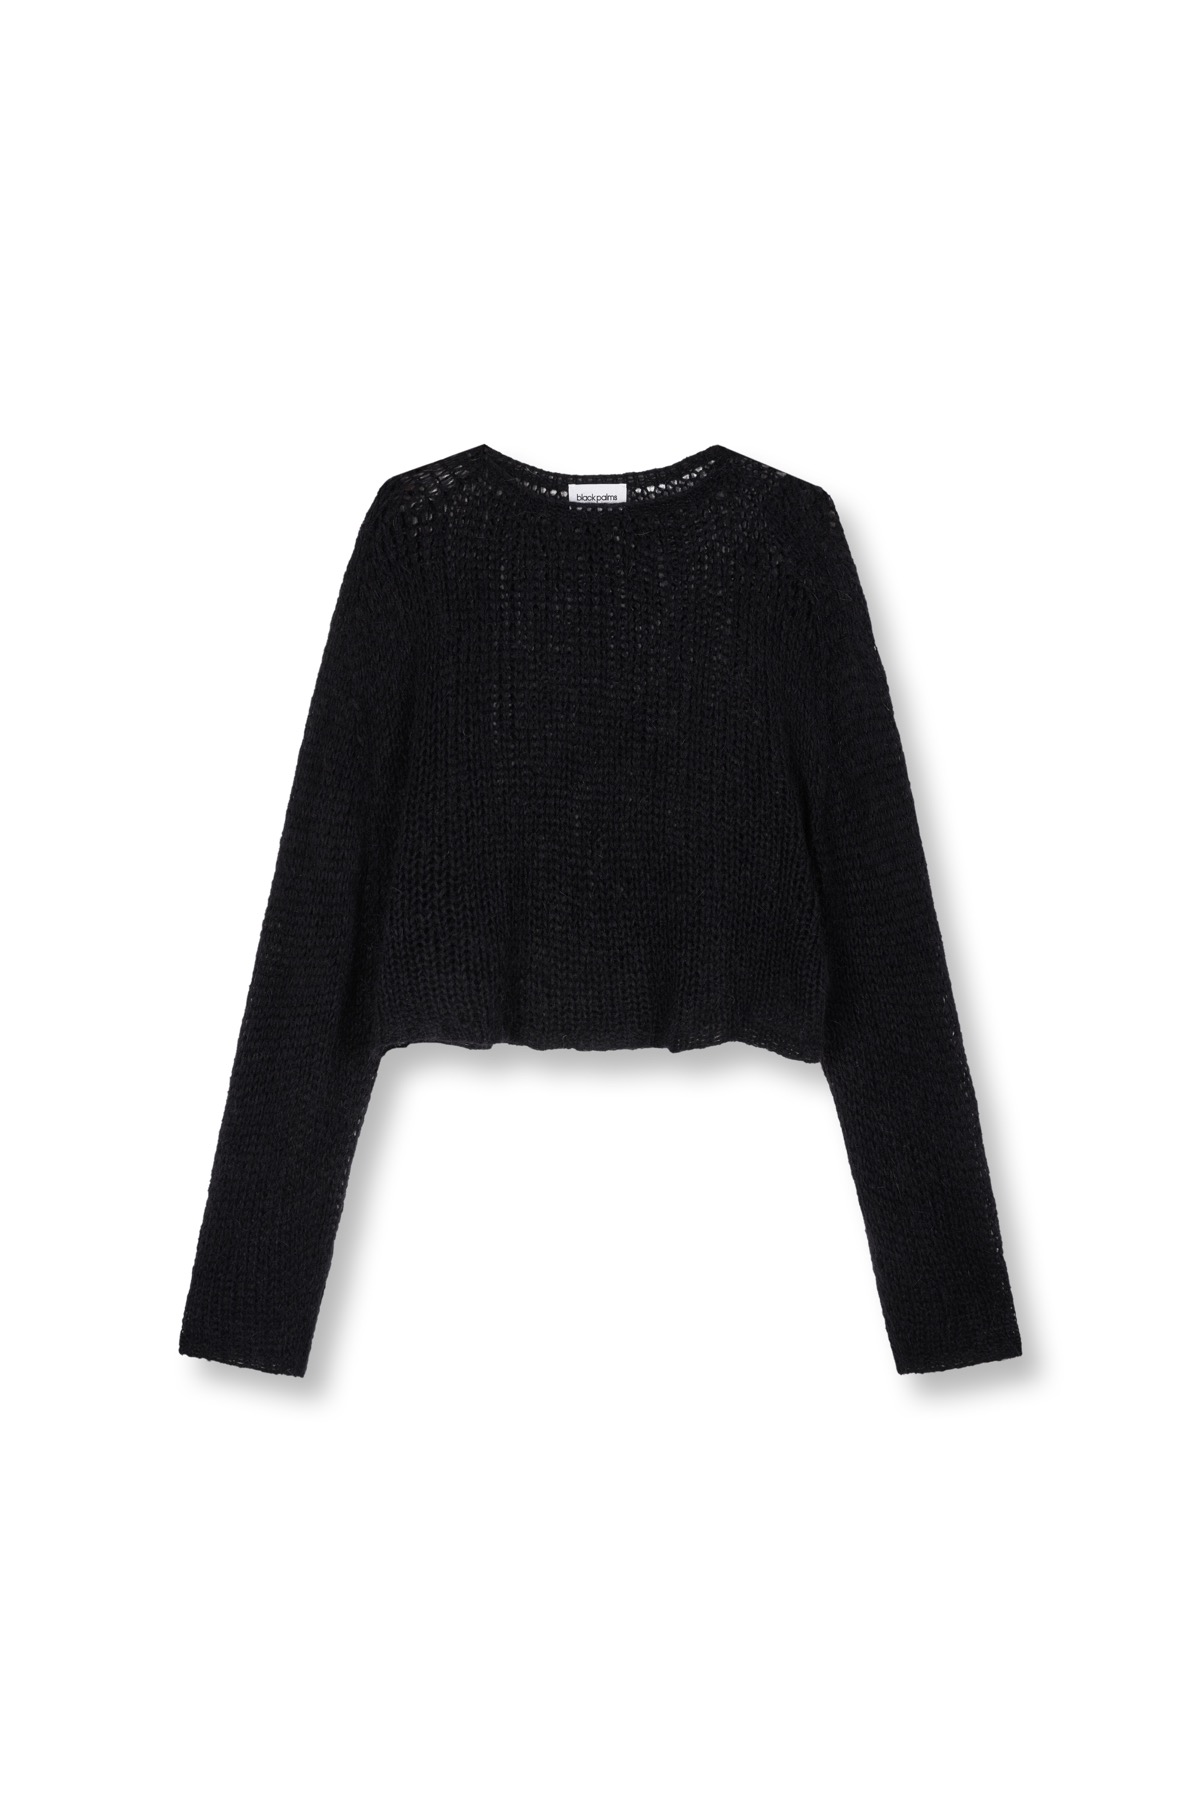 2024_STEPHL Cropped Sweater Black